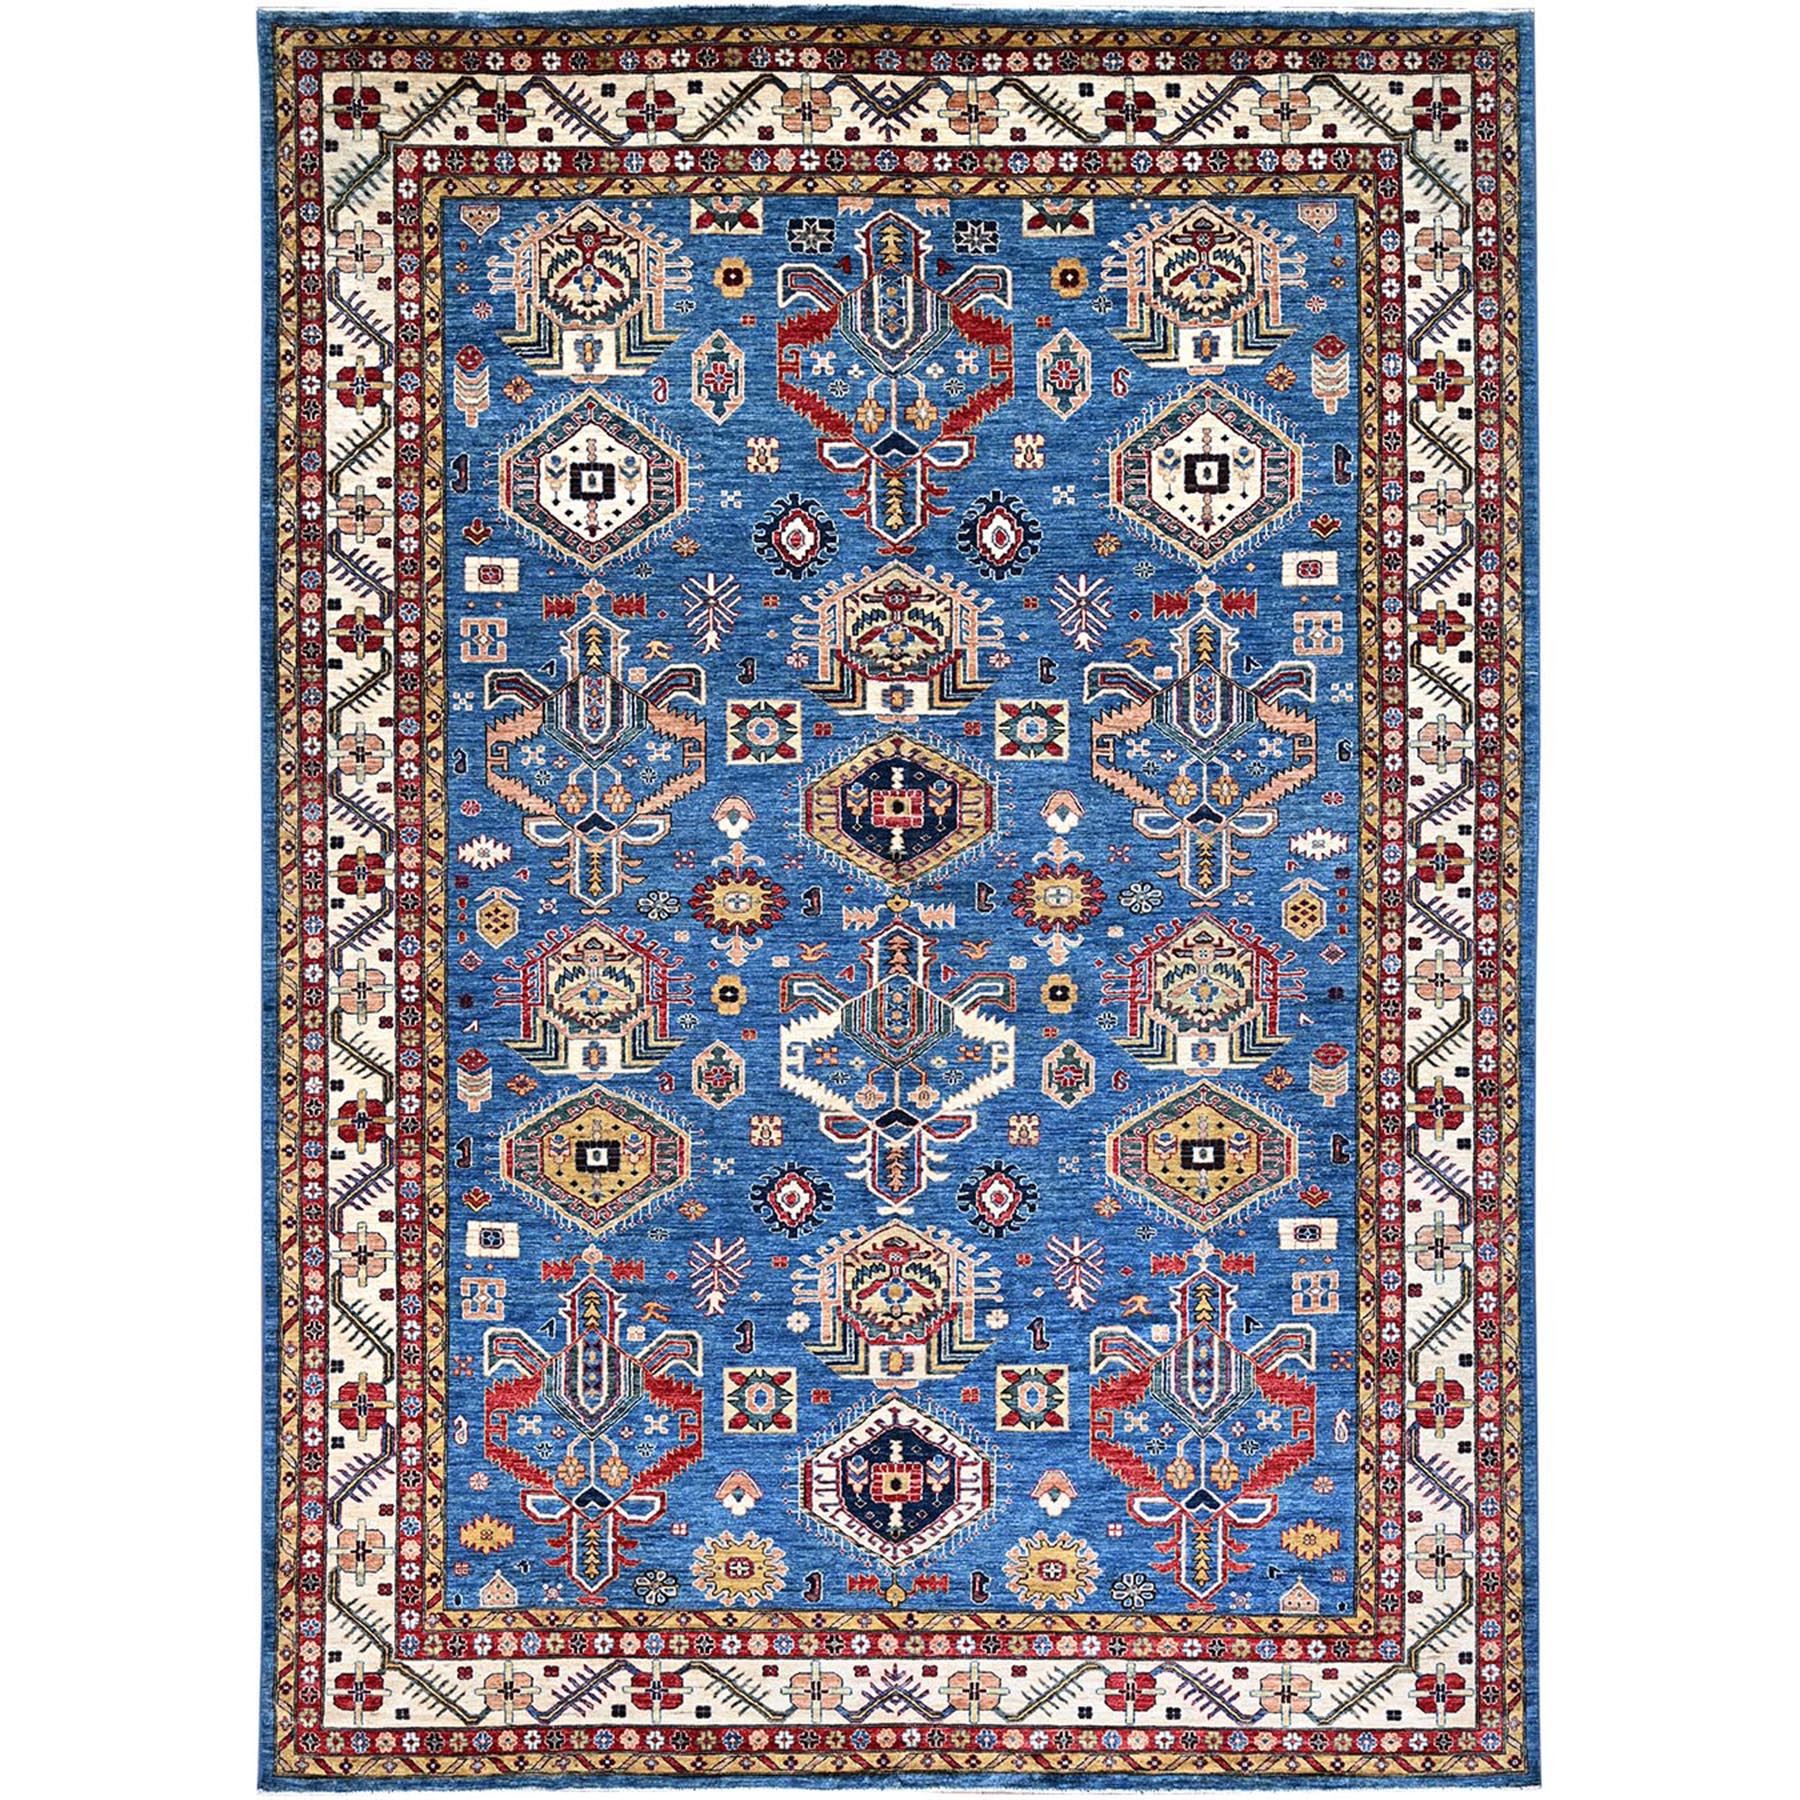 Dodger Blue With All White, Hand Knotted, Afghan Super Kazak with Tribal Medallions Design, Natural Dyes, Soft Wool, Oriental Rug 